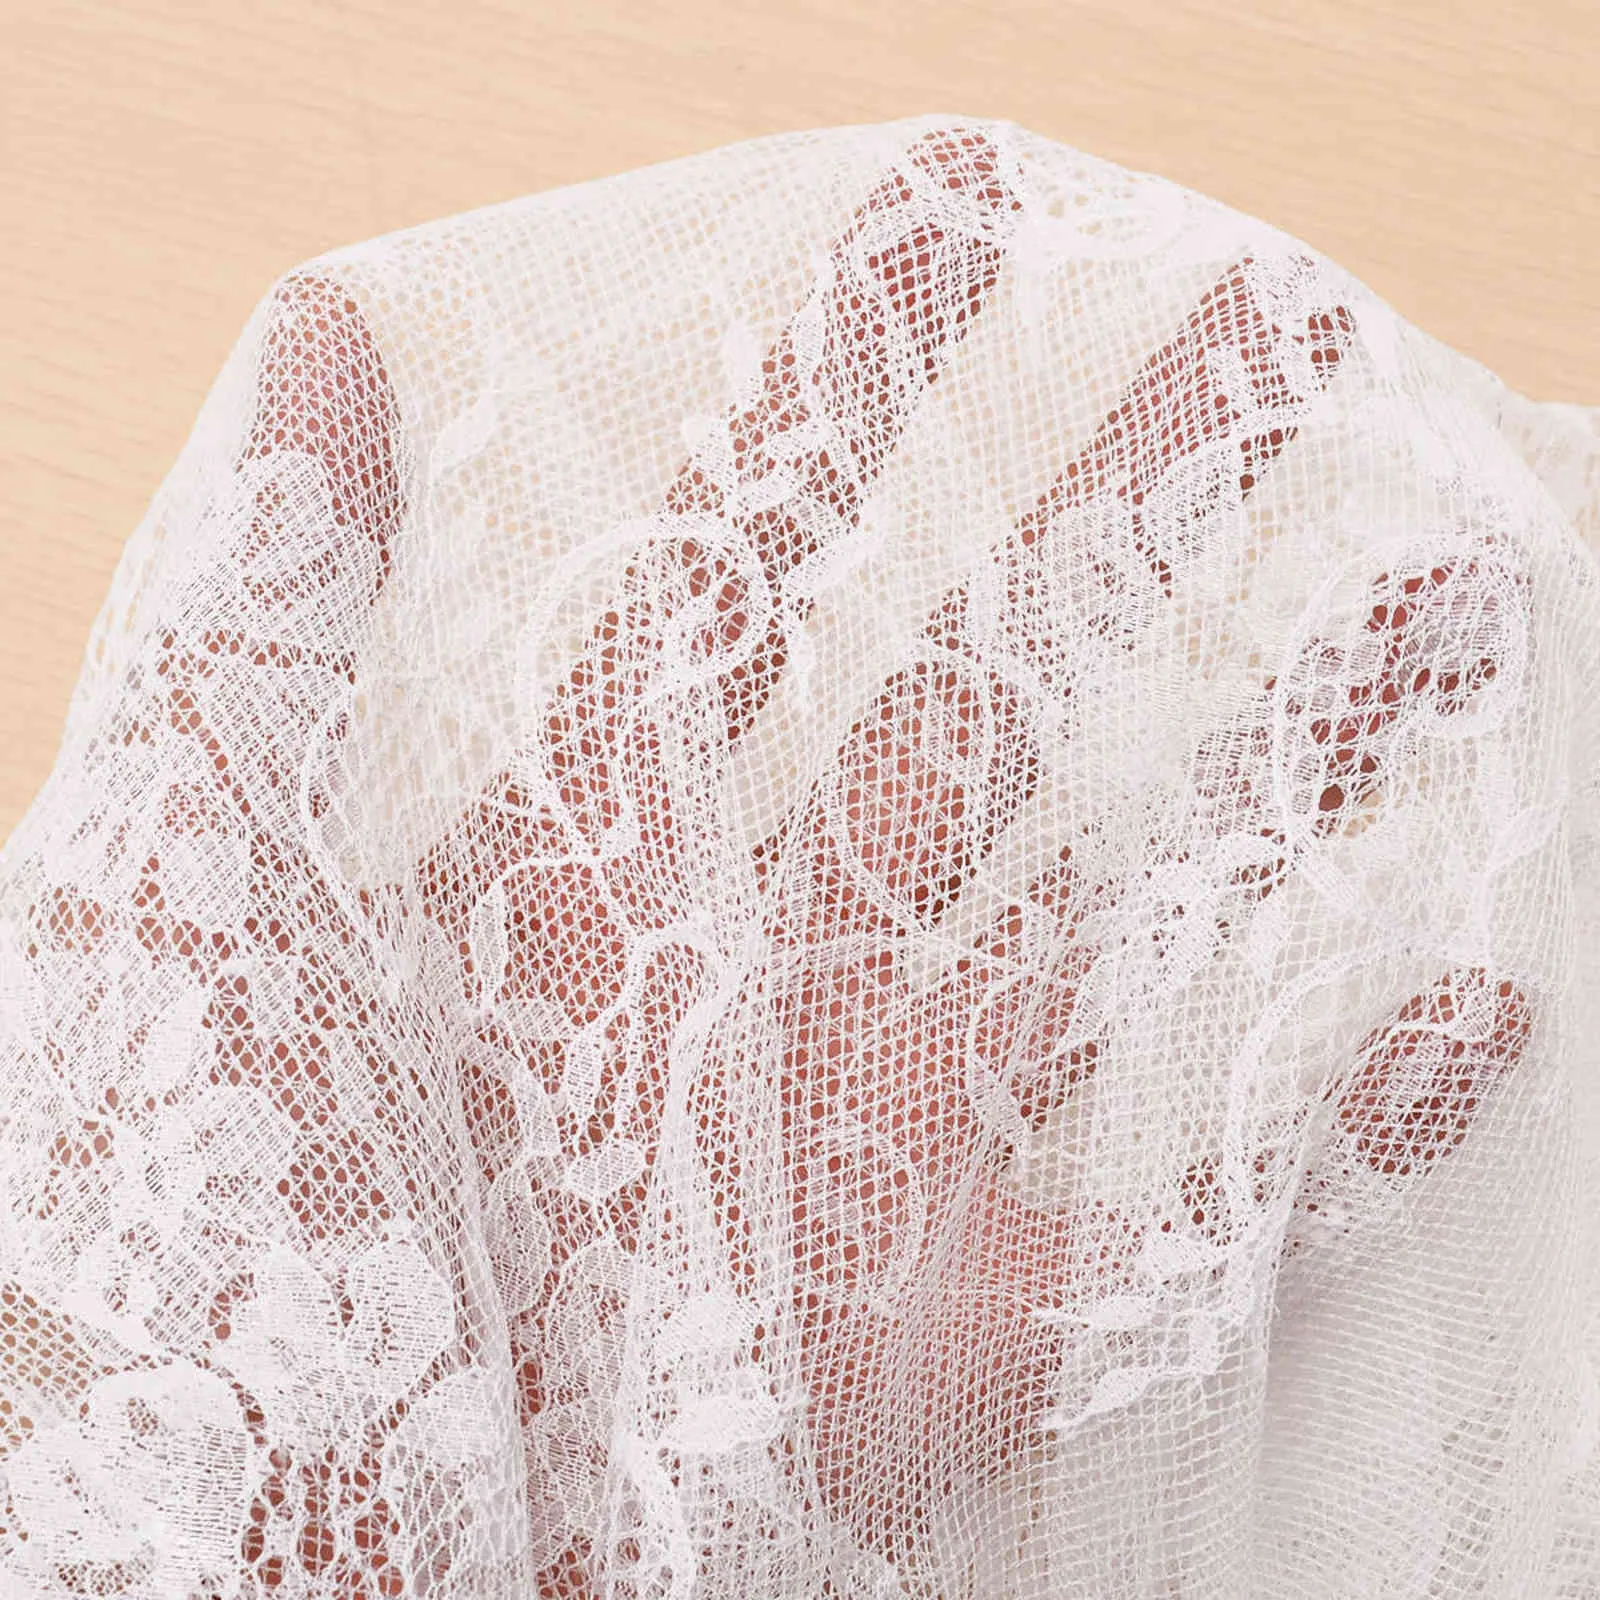 Tablecloth Embroidery Lace White Vintage Kitchen Tea Coffee Table Cover Cloth for Party Wedding el Decor 211103